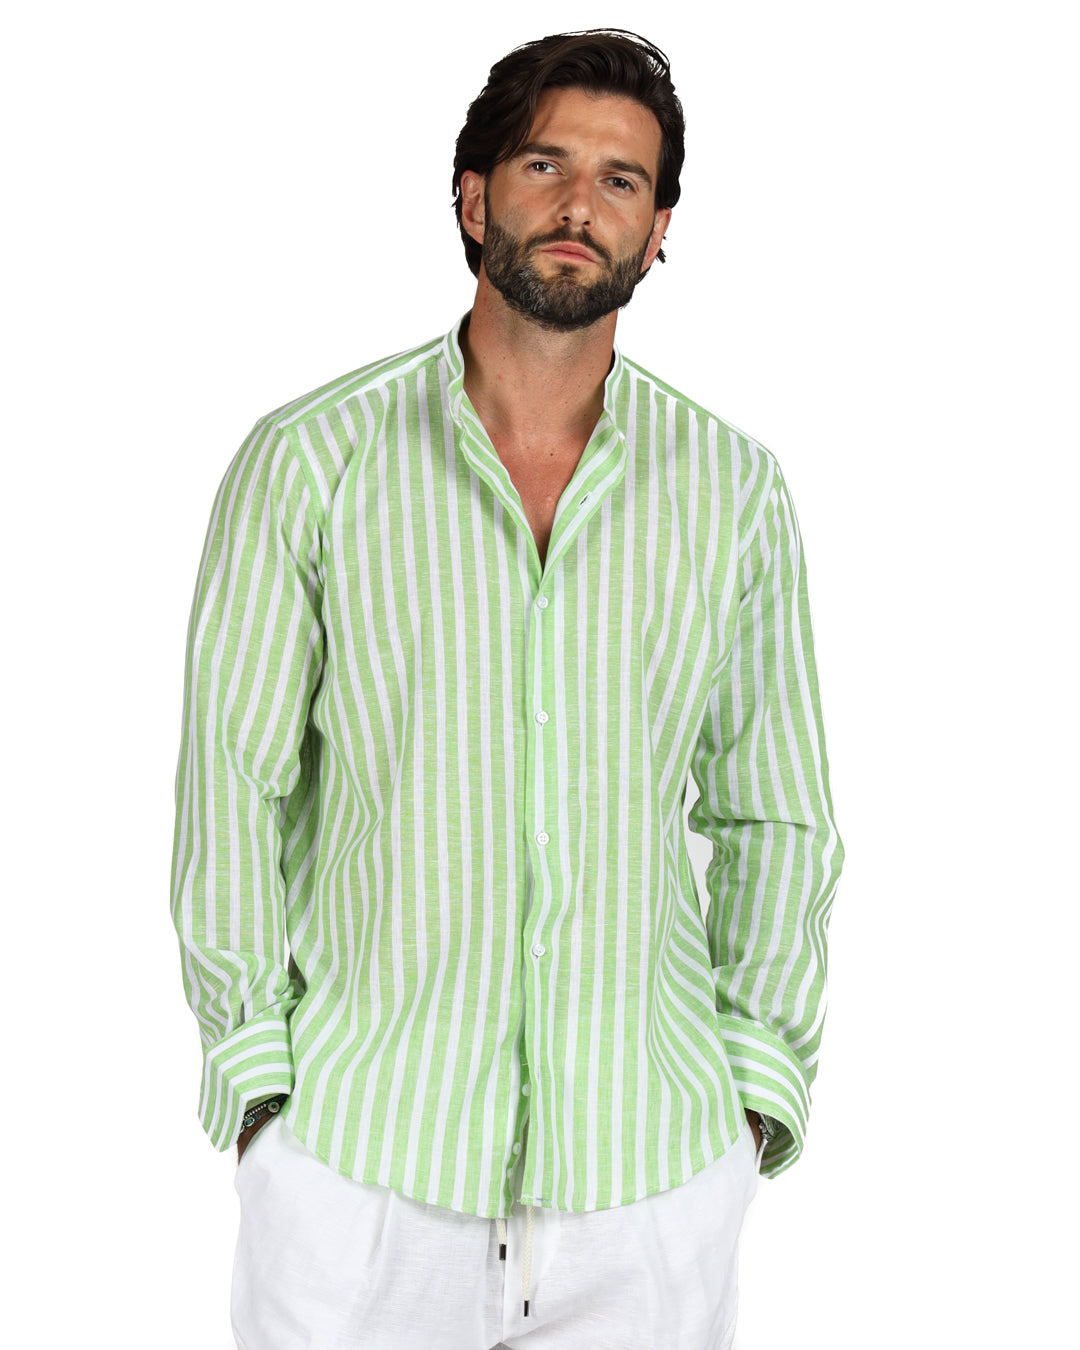 Procida - Korean shirt with wide green stripes in linen